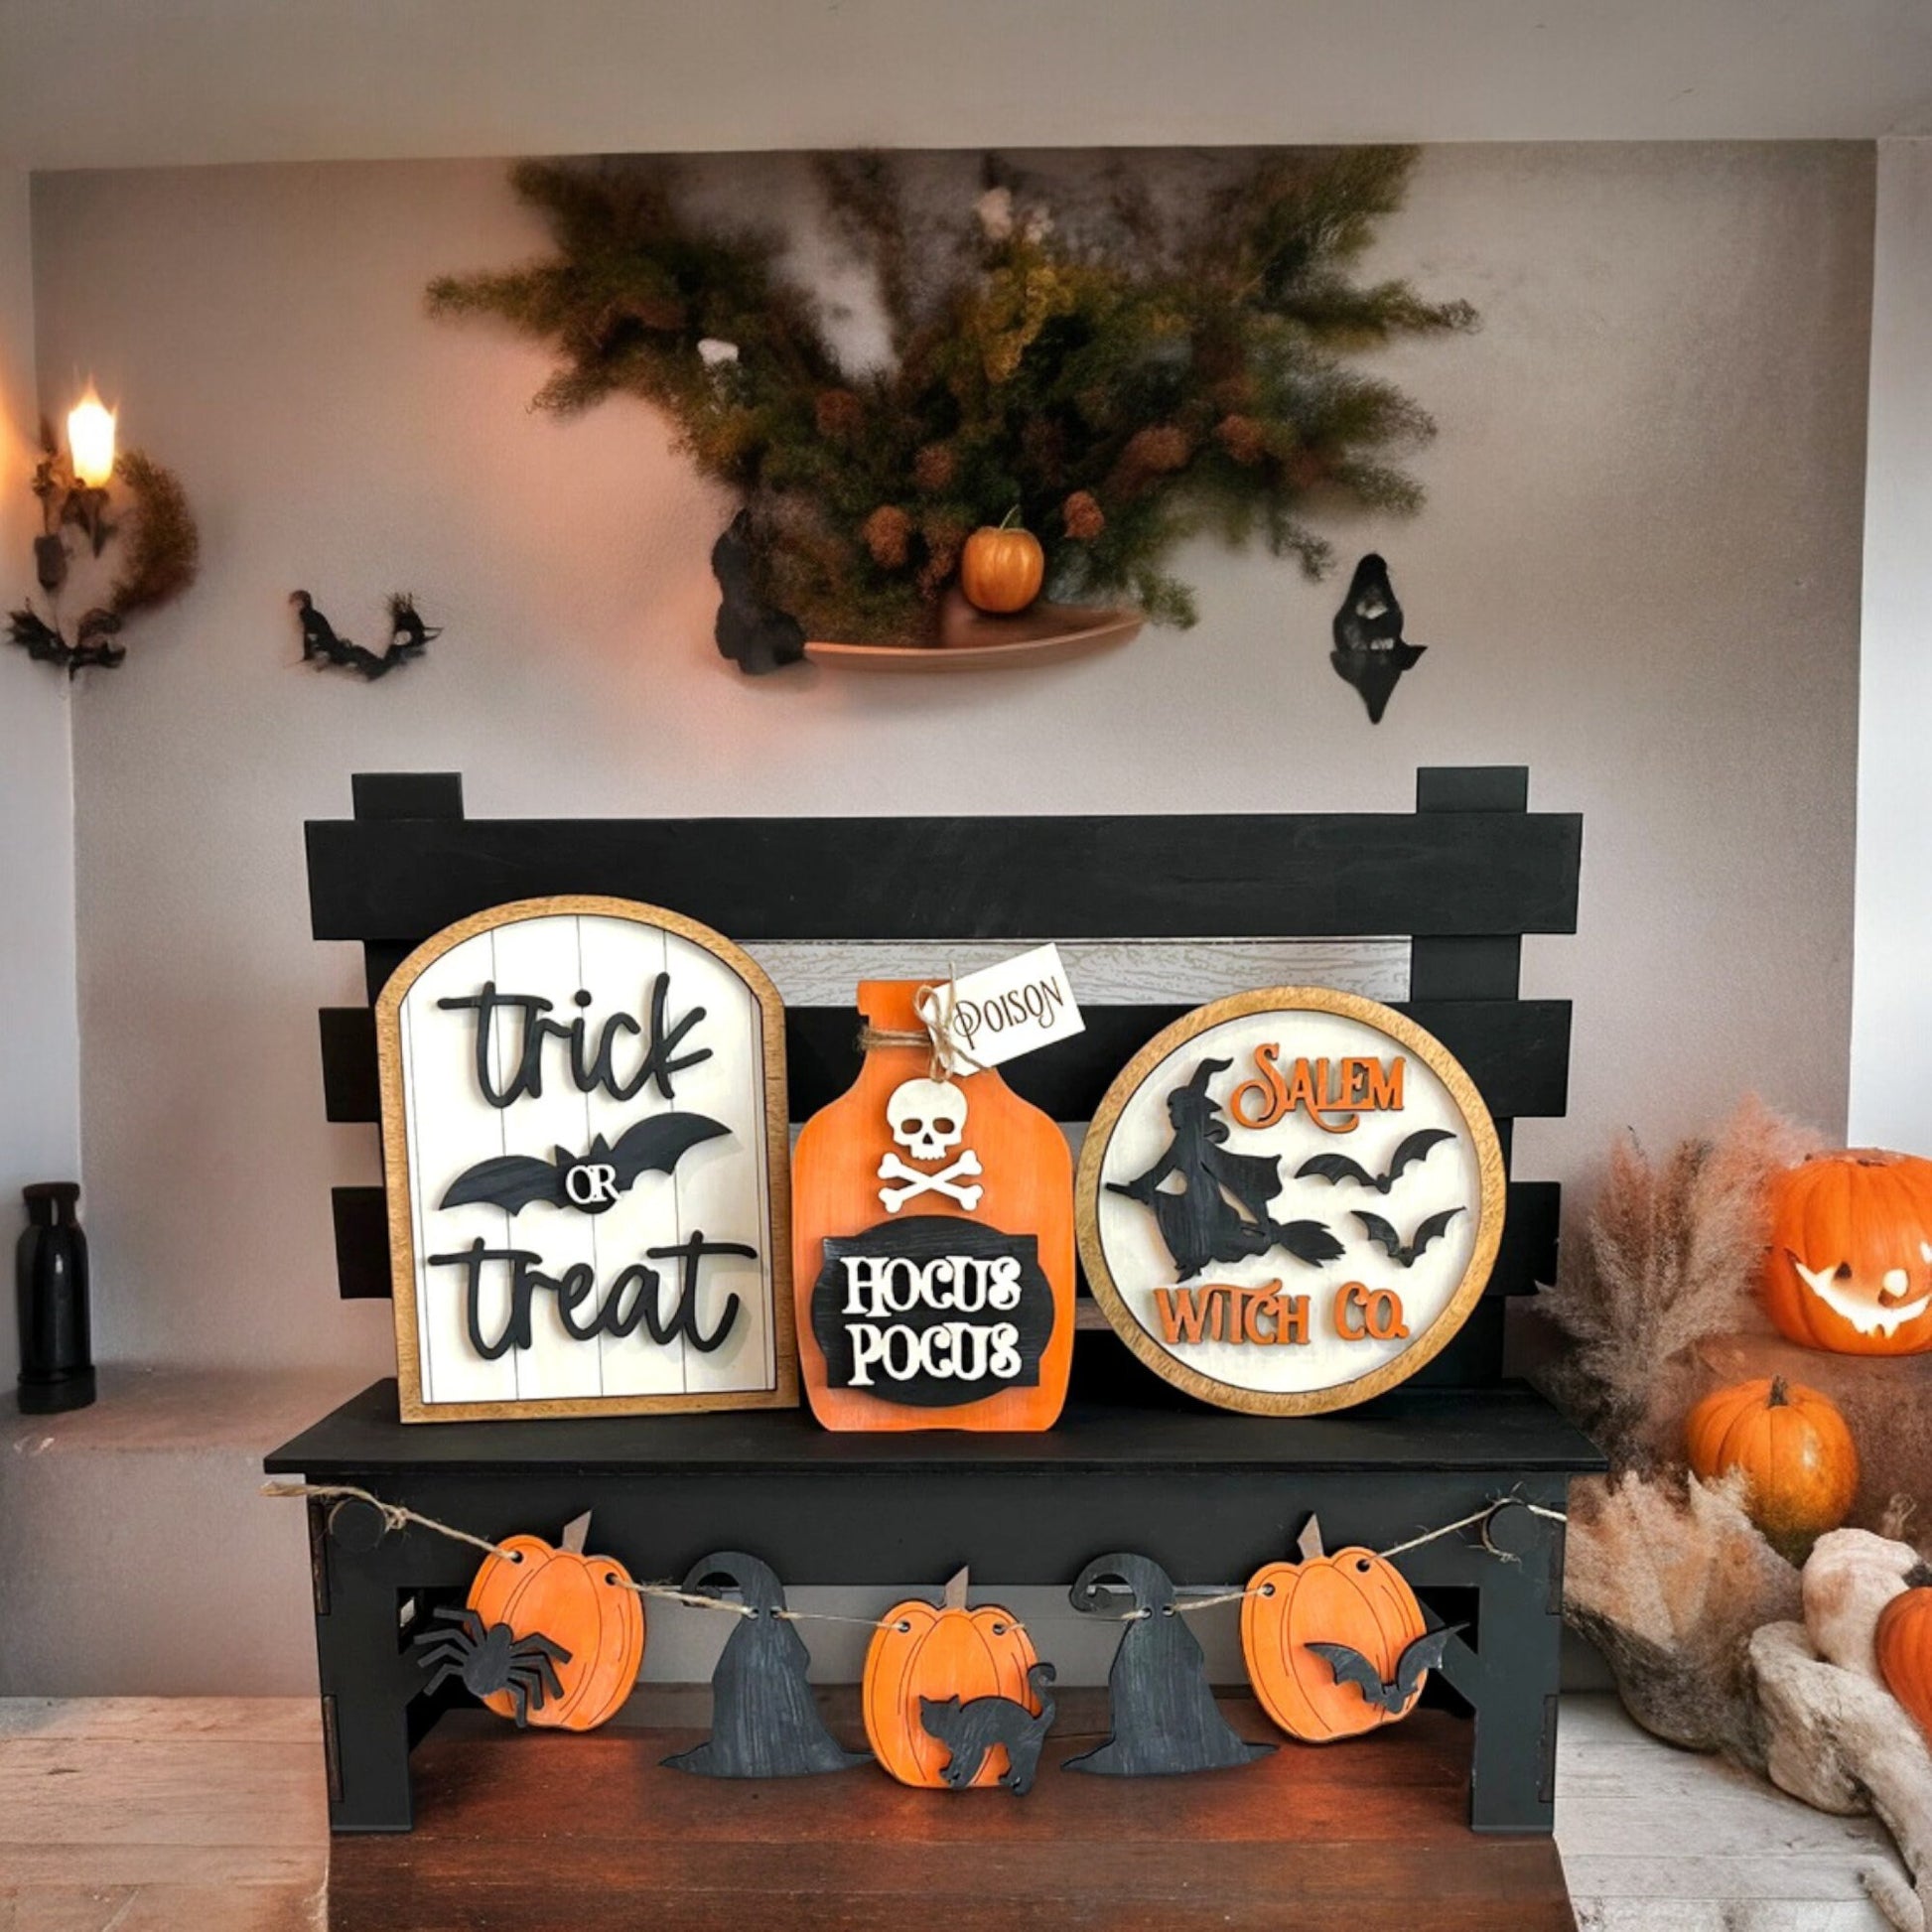 a display of halloween decorations on a mantle